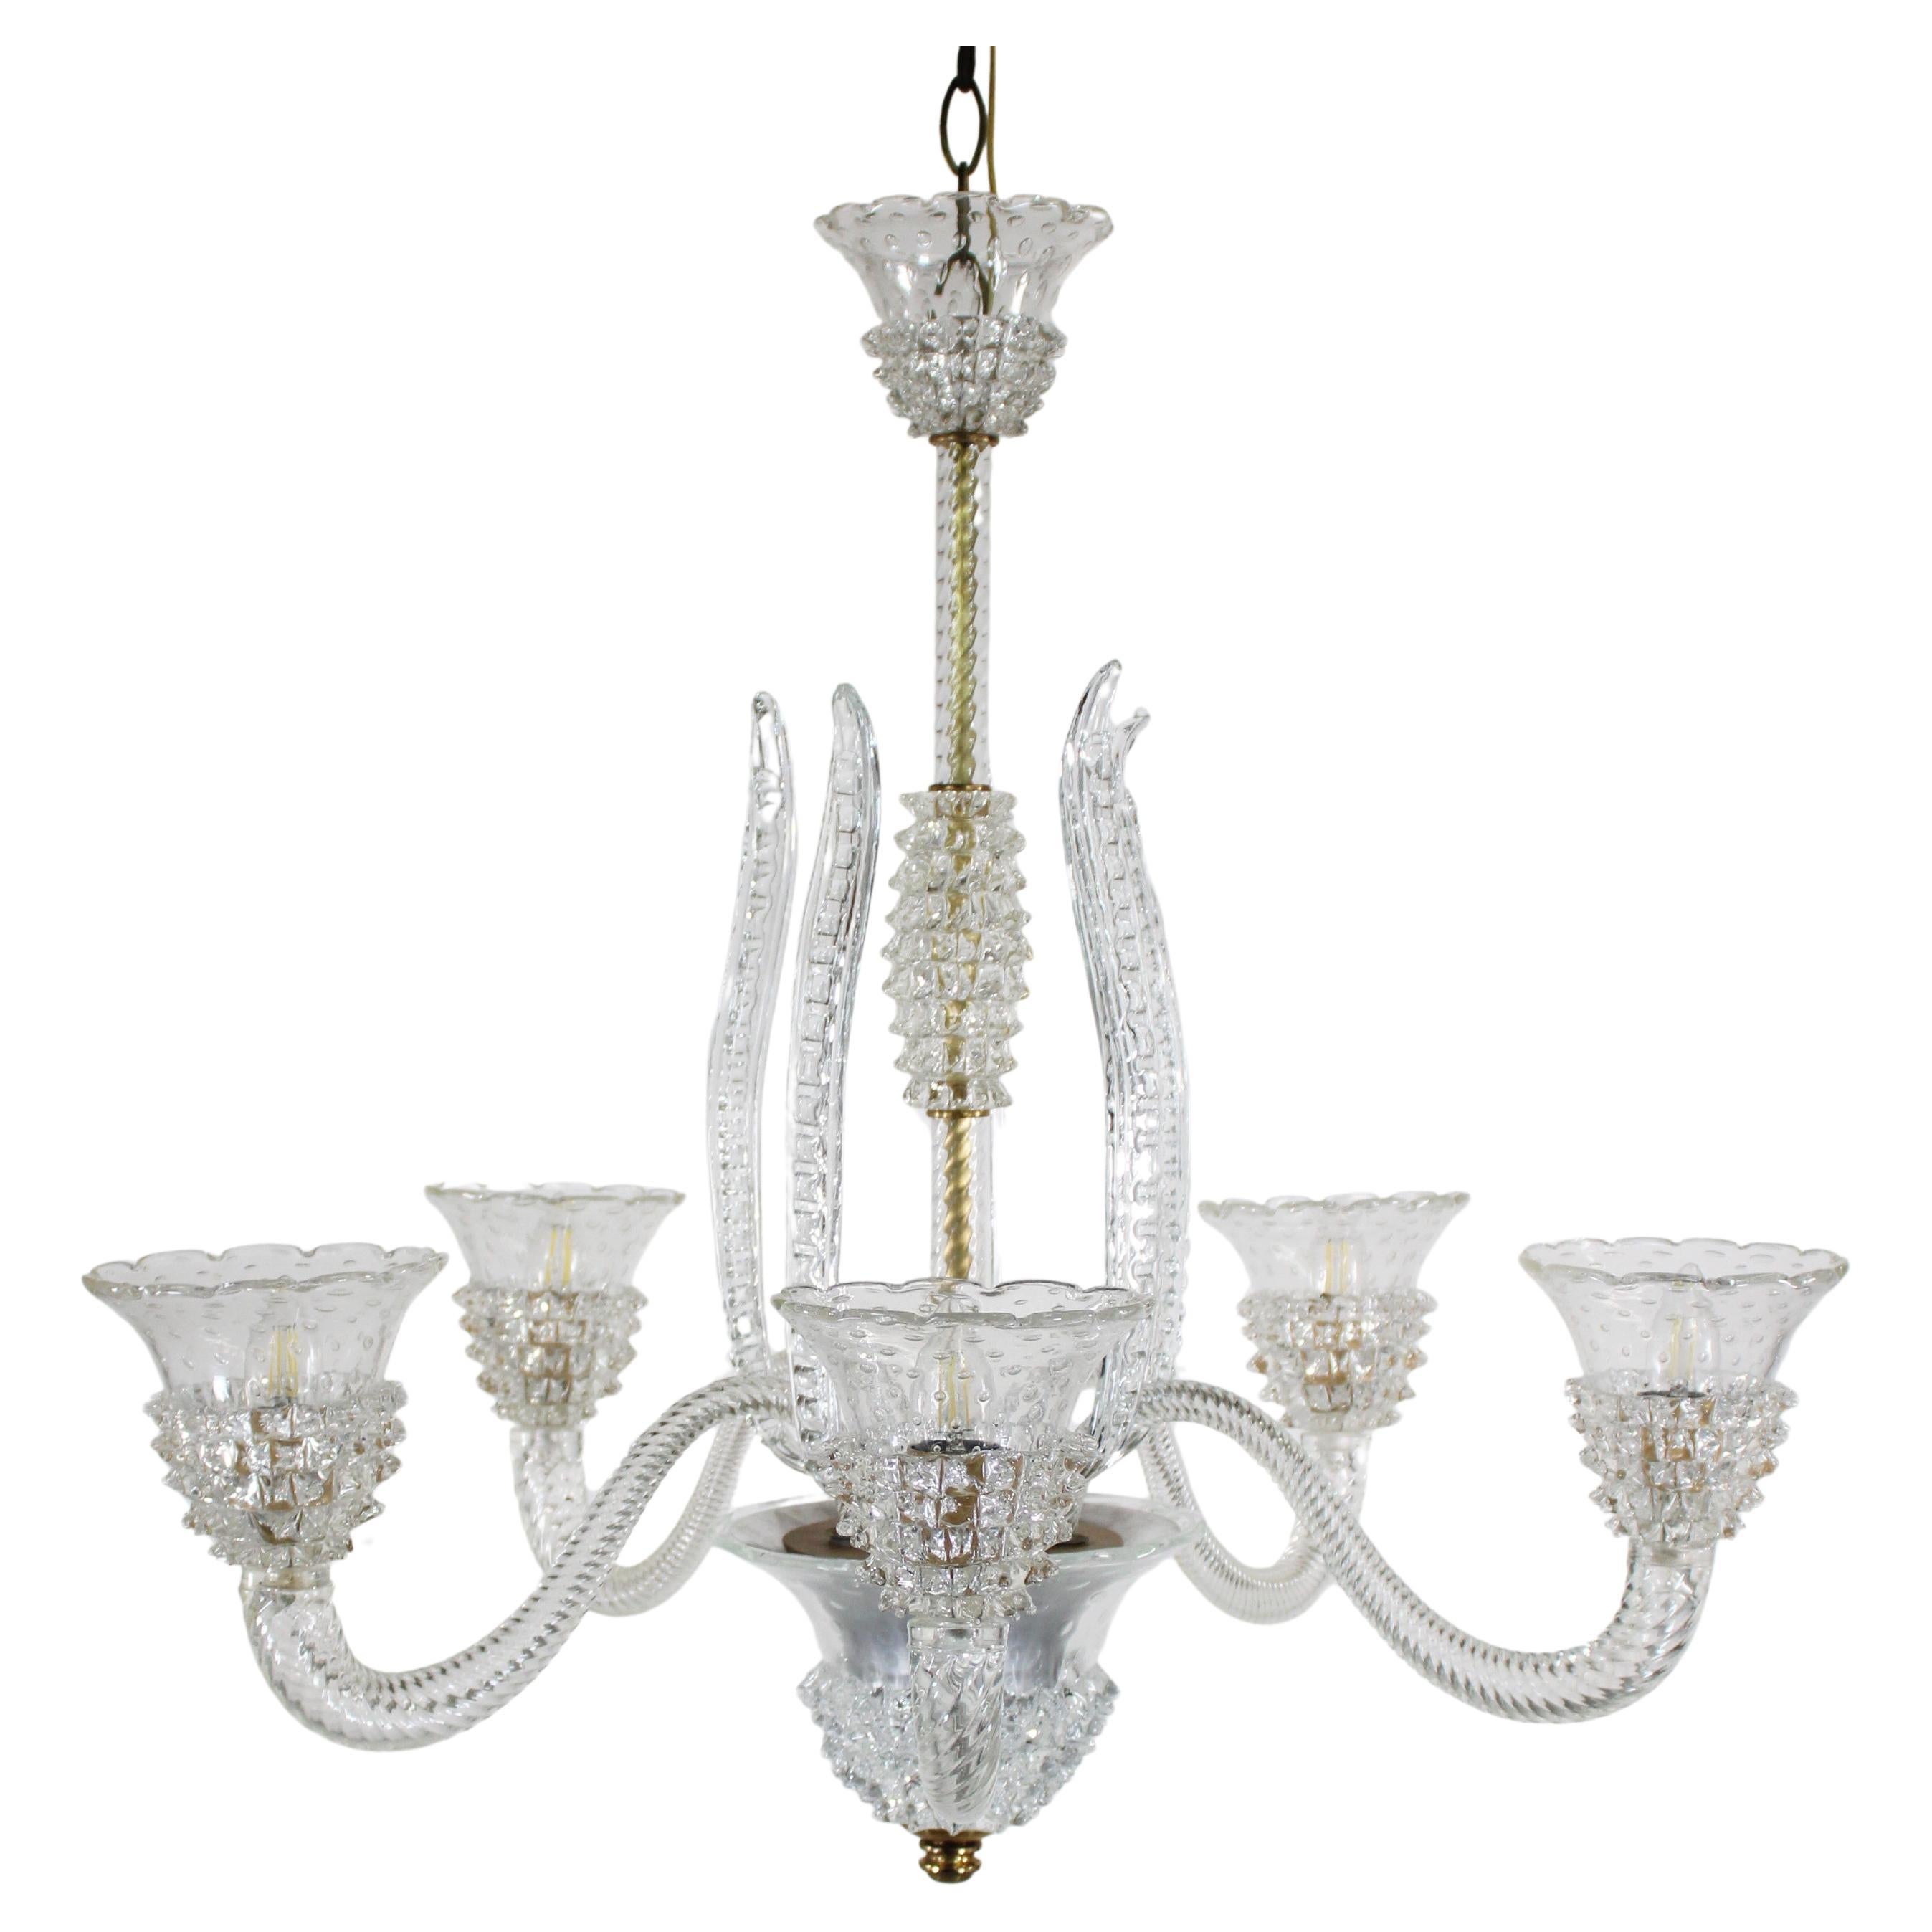 Five Arm Rostrato Murano Chandelier in the Manner of Ercole Barovier For Sale